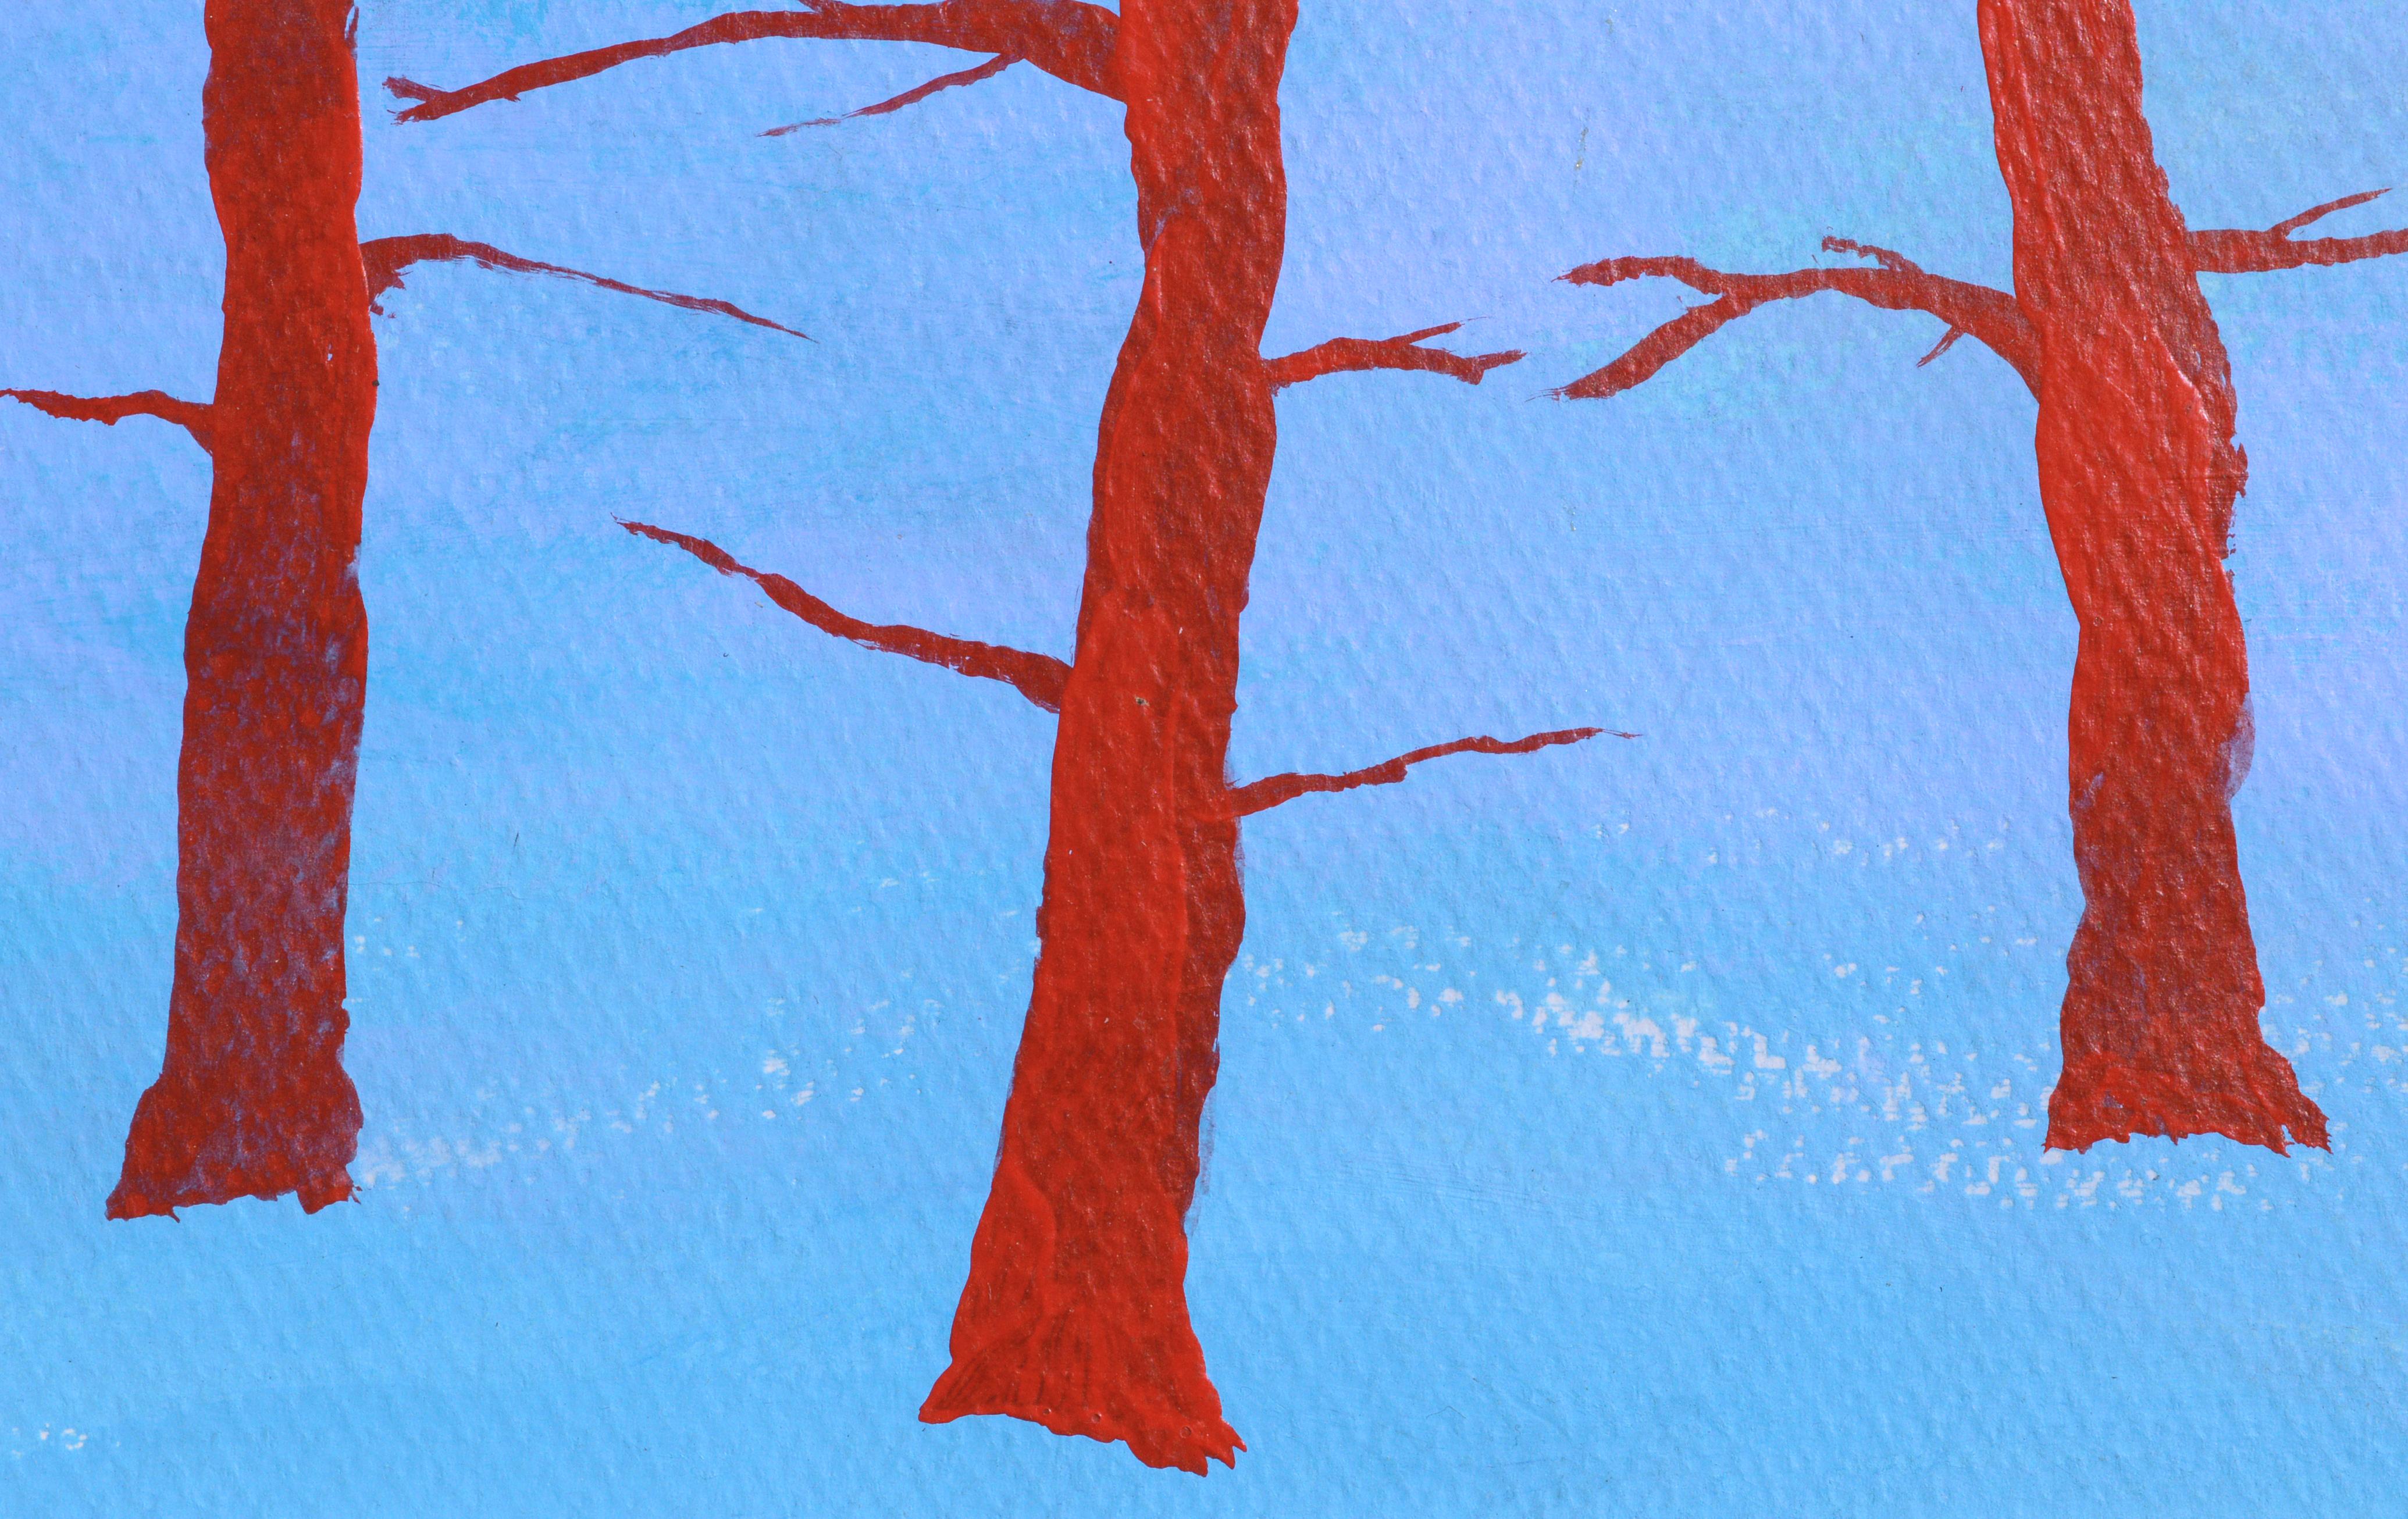 Bold hard edge landscape with minimalist red trees silhouetted against a sky blue background by Louis Nadalini (American, 1927-1995). Signed 